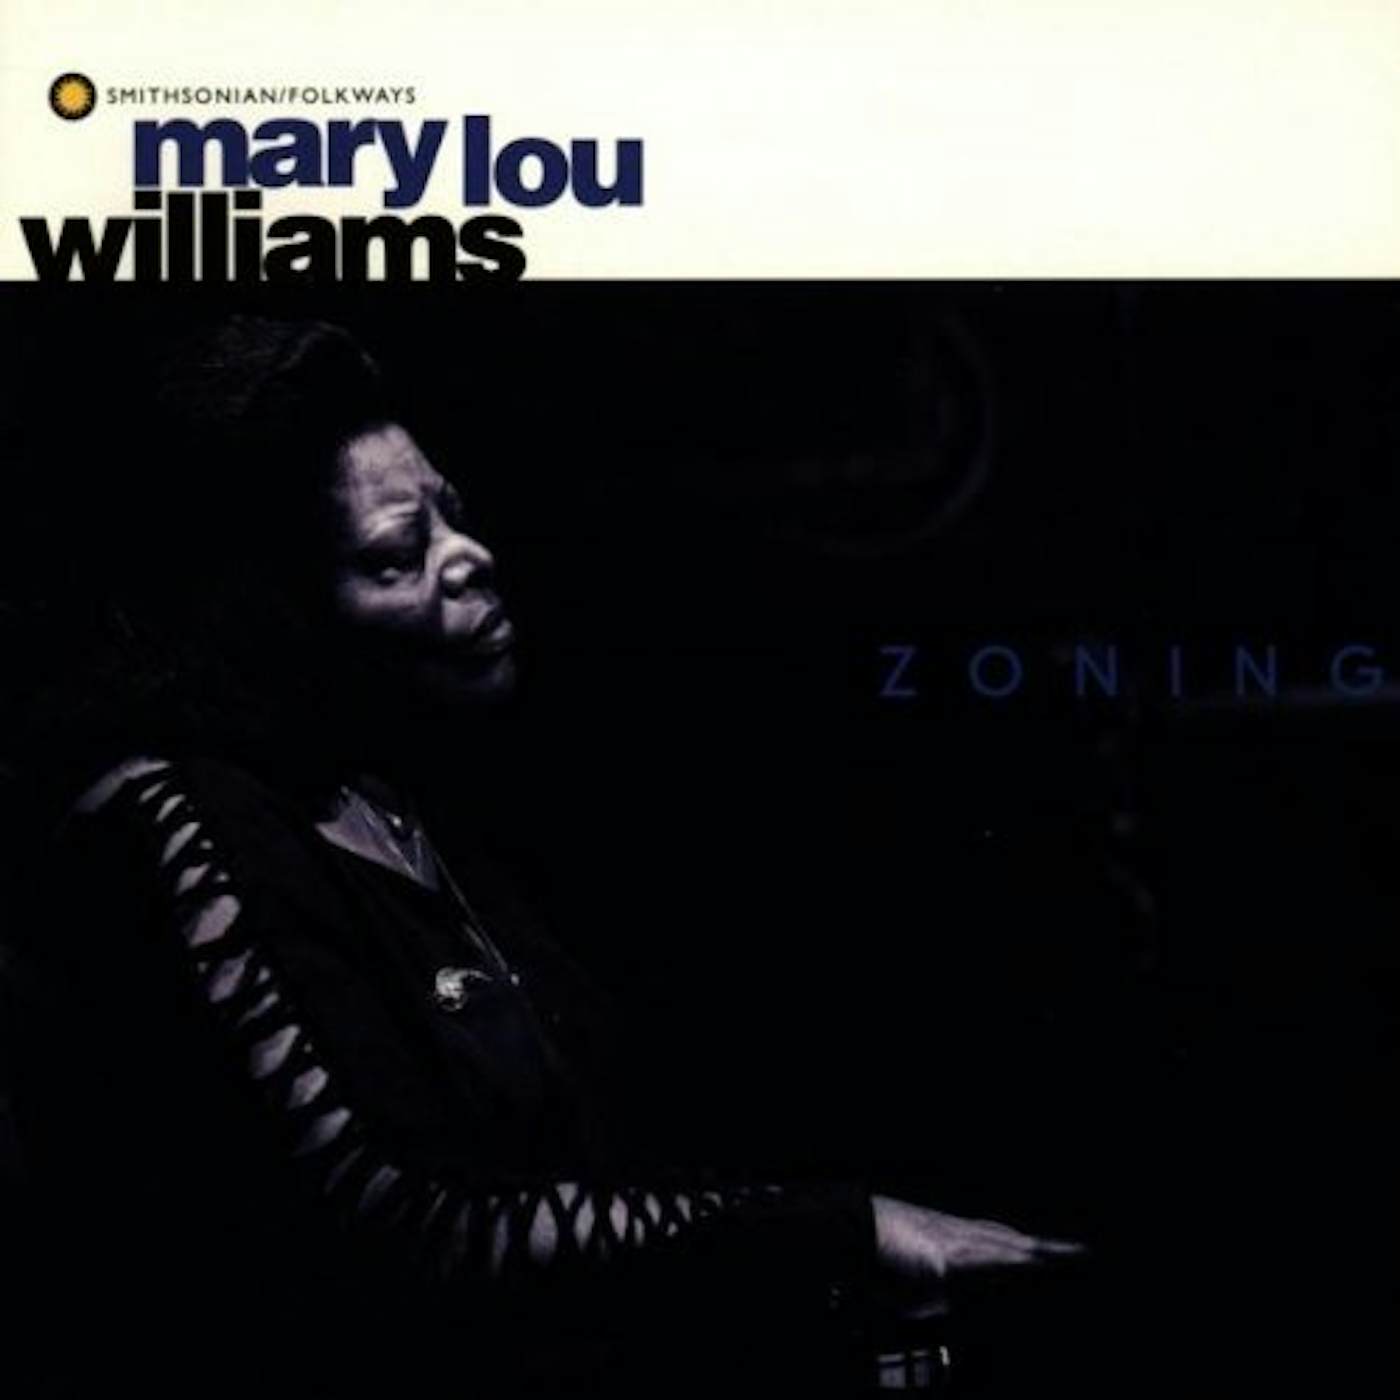 Mary Lou Williams ZONING CD